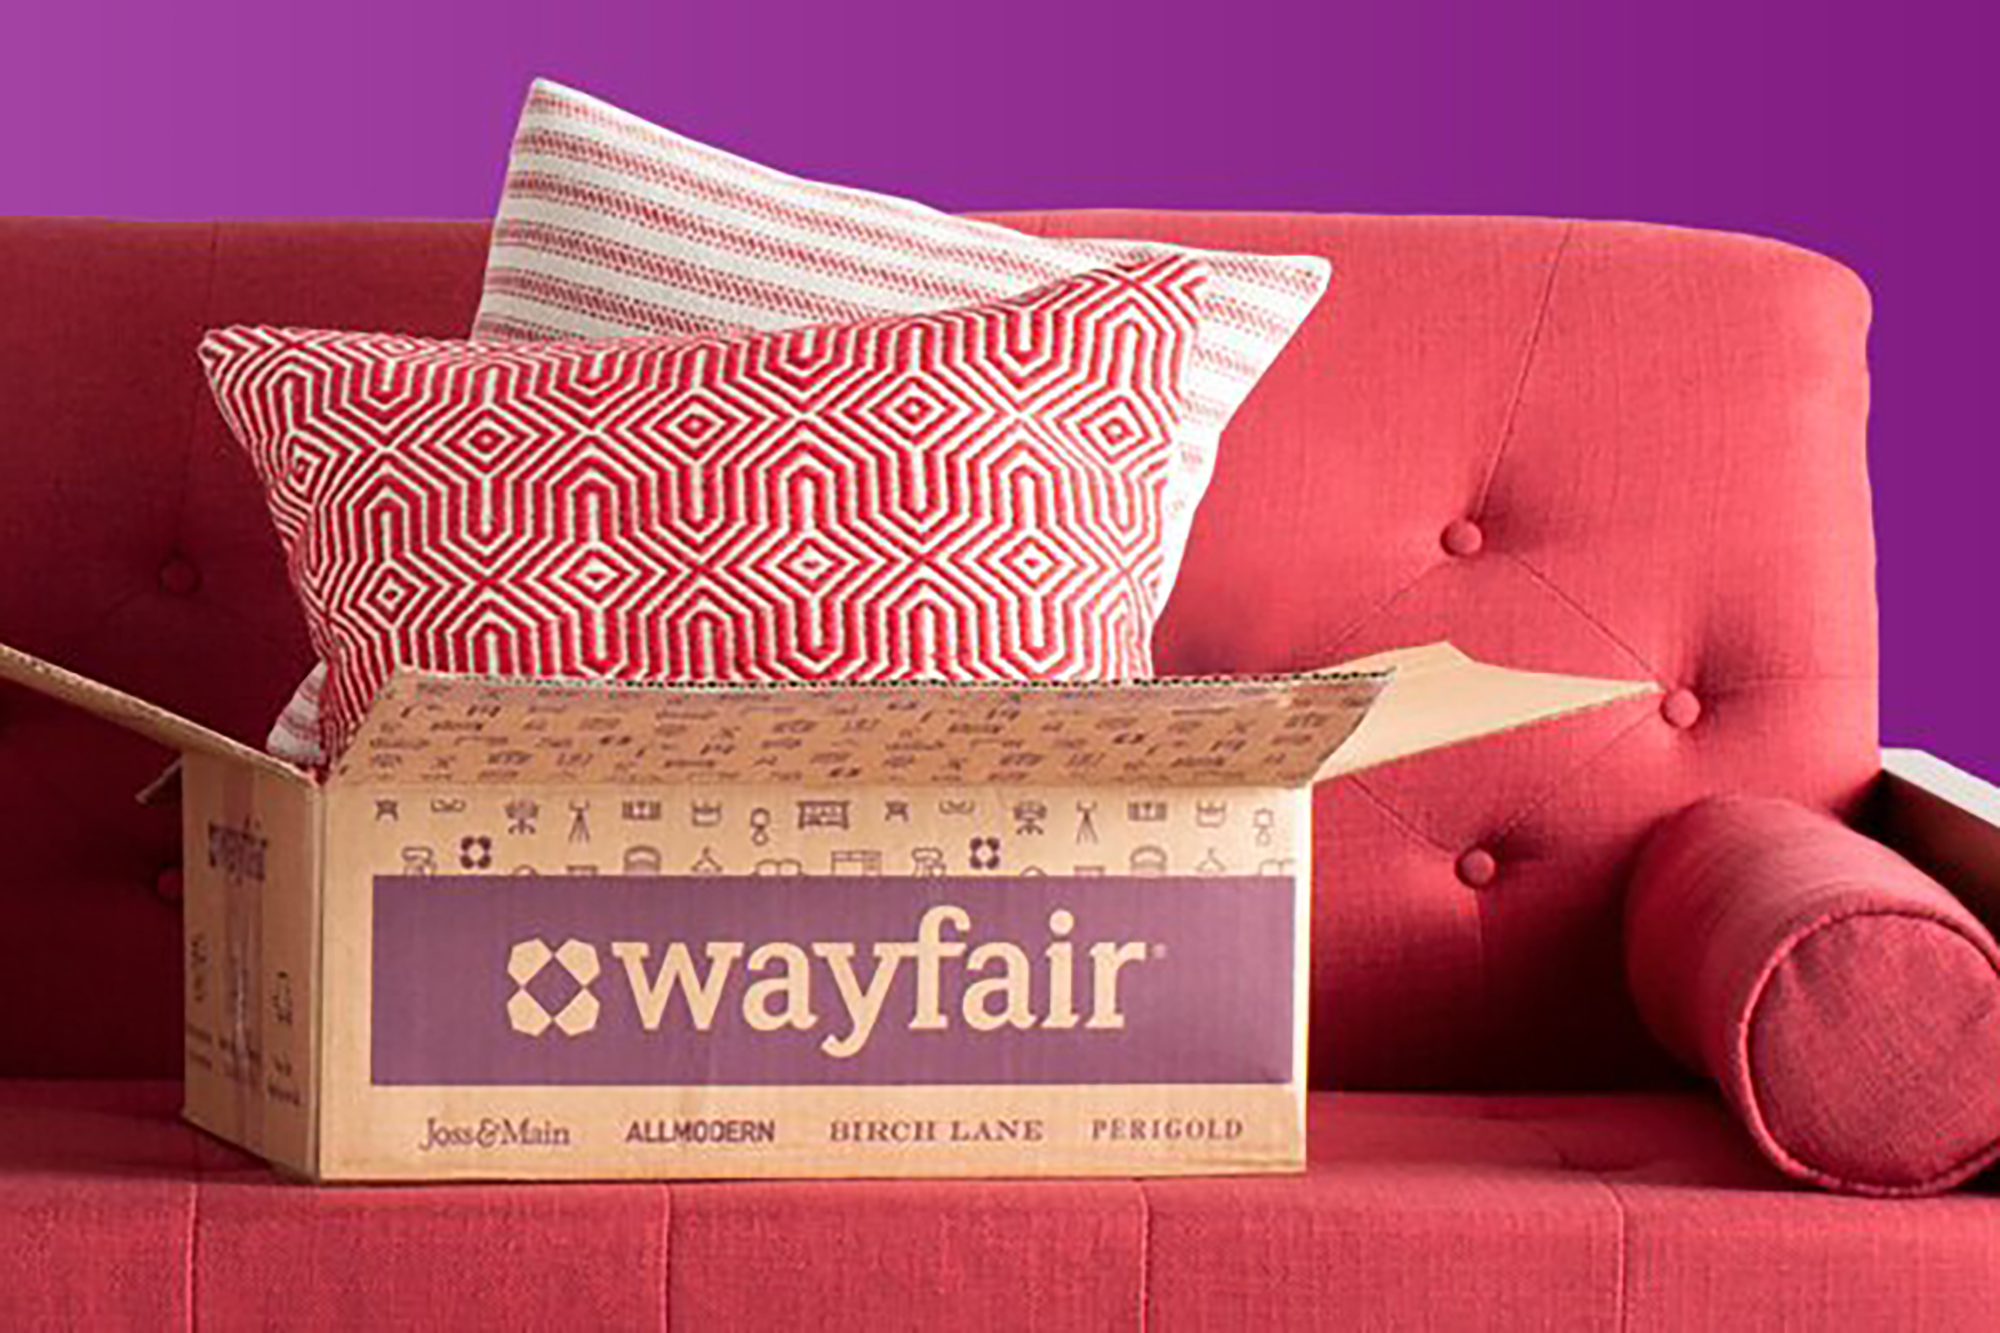 A Wayfair box on a red couch 